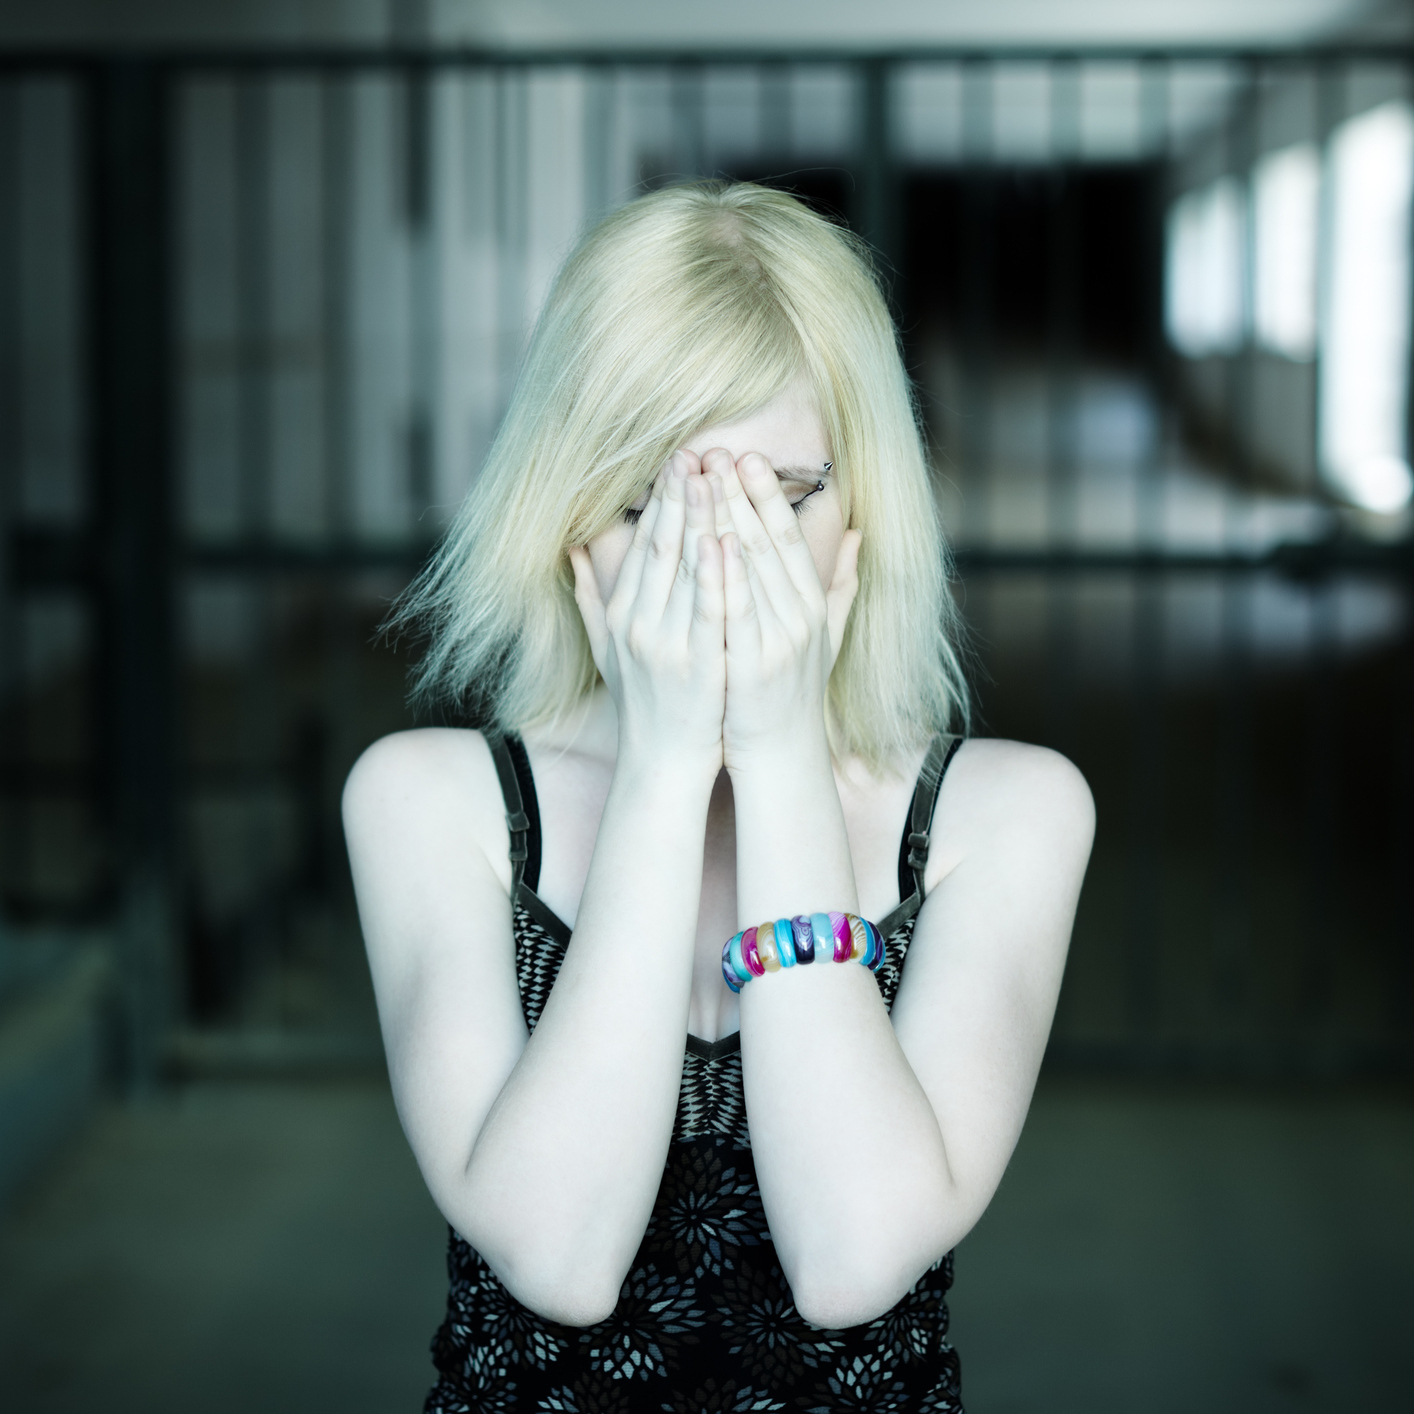 woman in dark hallway with hands covering face and eyes looking upset